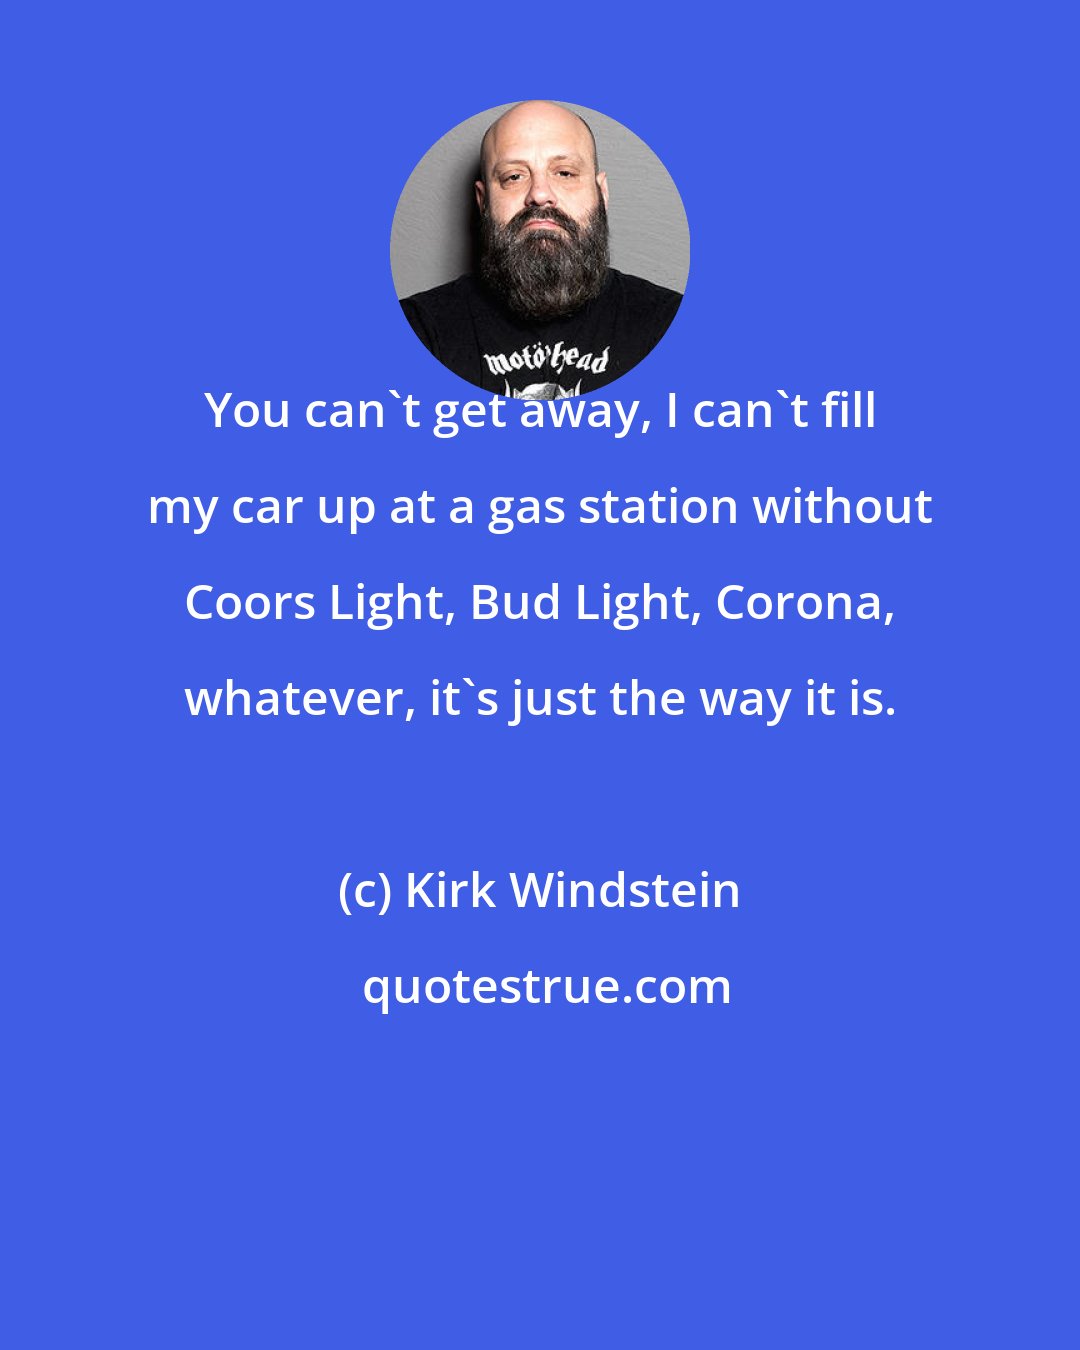 Kirk Windstein: You can't get away, I can't fill my car up at a gas station without Coors Light, Bud Light, Corona, whatever, it's just the way it is.